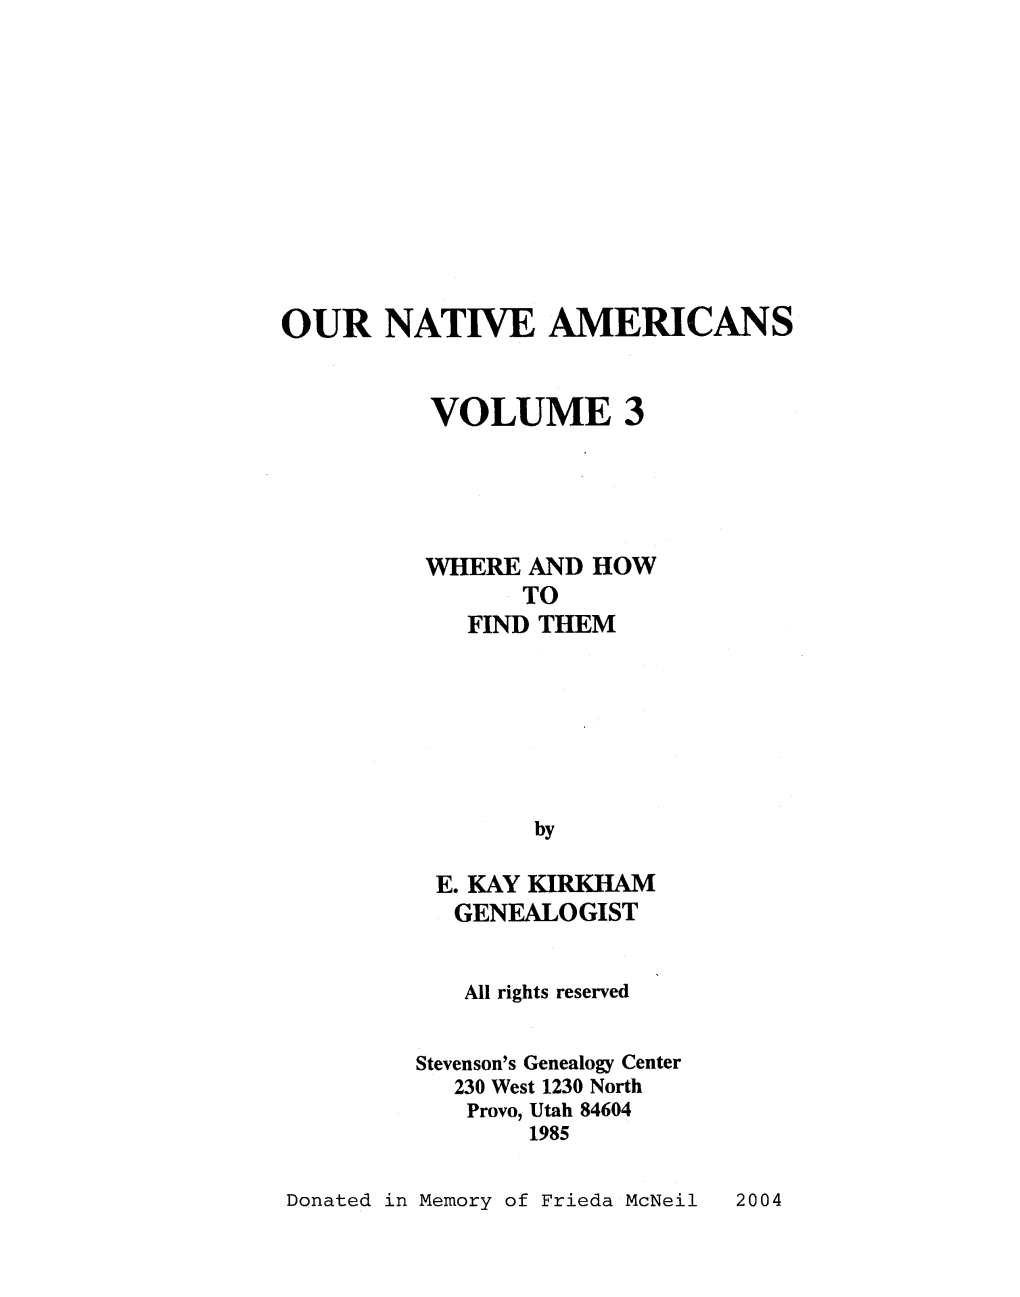 Our Native Americans Volume 3